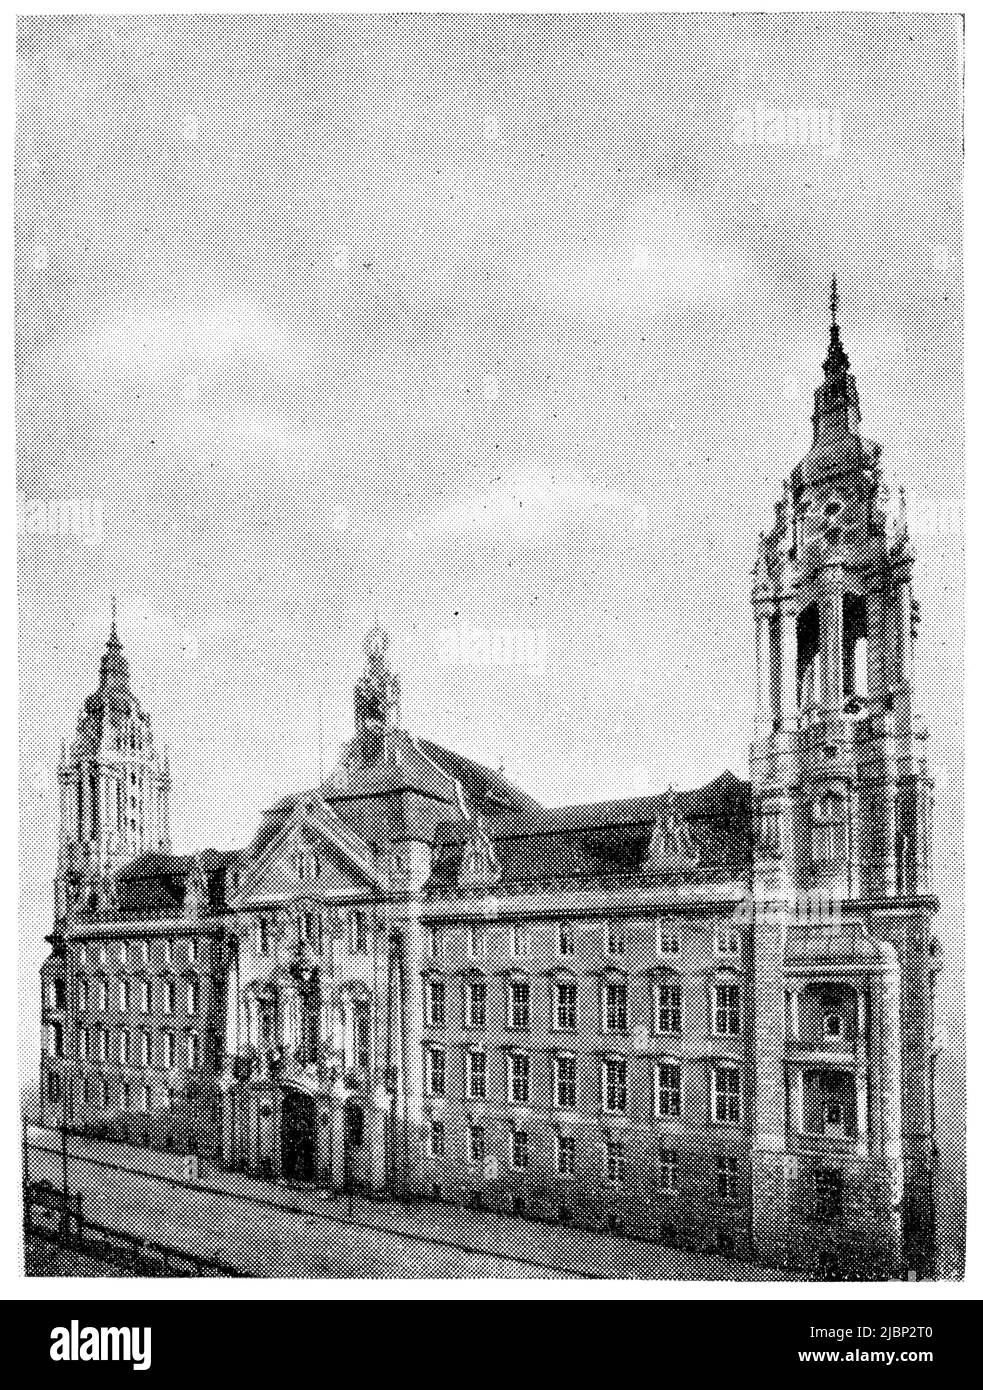 The building of the district court of Berlin, Germany by the architect Otto Schmalz. Publication of the book 'Meyers Konversations-Lexikon', Volume 2, Leipzig, Germany, 1910 Stock Photo